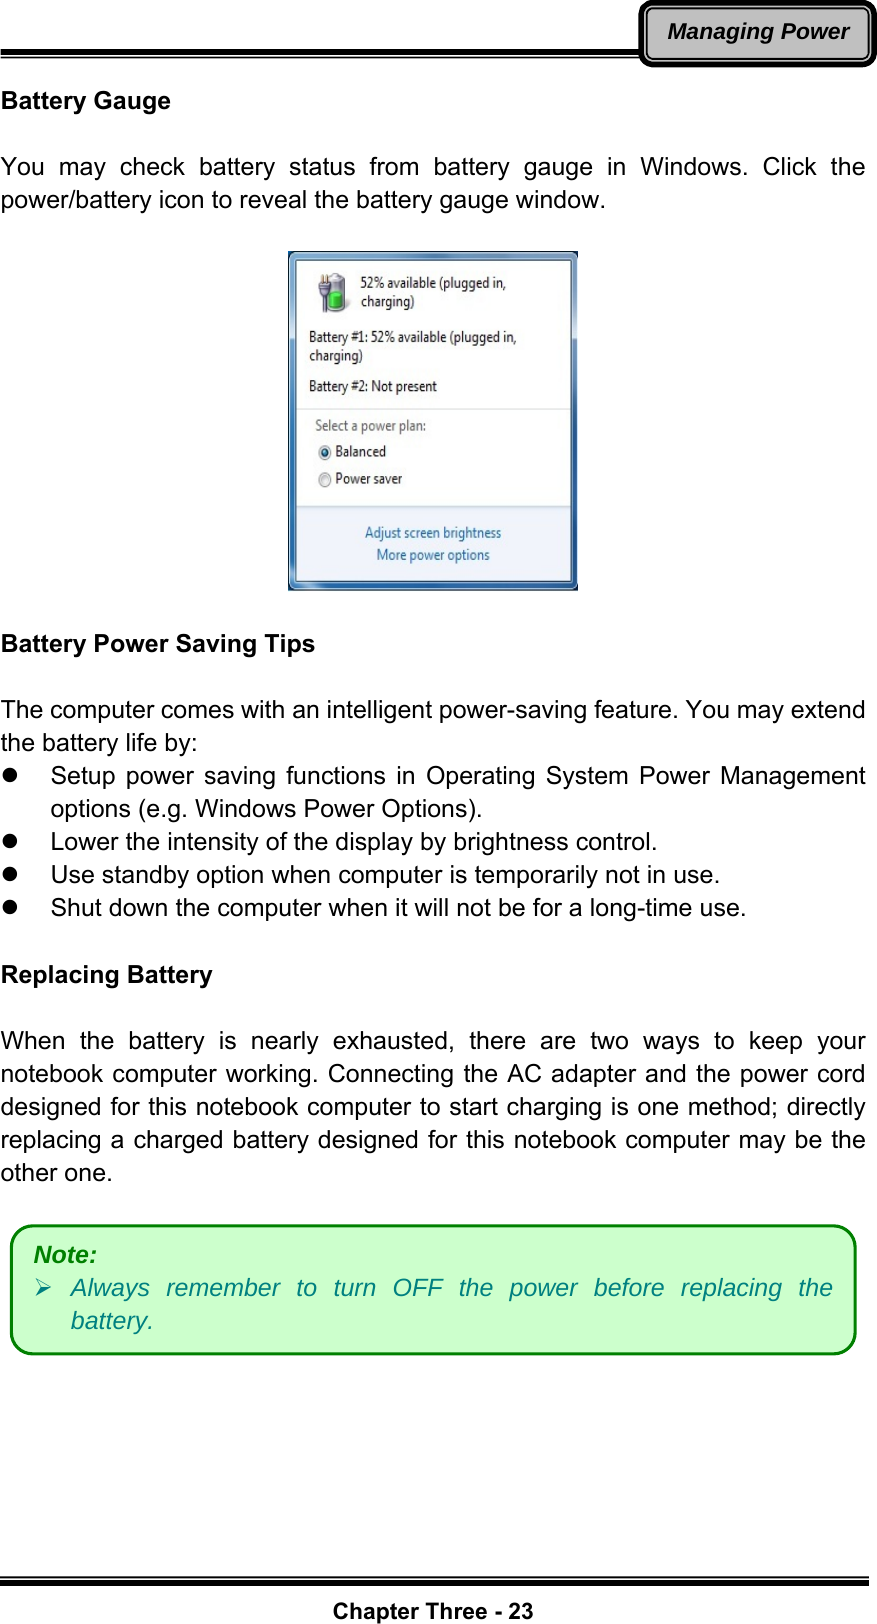   Chapter Three - 23Managing PowerBattery Gauge  You may check battery status from battery gauge in Windows. Click the power/battery icon to reveal the battery gauge window.      Battery Power Saving Tips  The computer comes with an intelligent power-saving feature. You may extend the battery life by: z  Setup power saving functions in Operating System Power Management options (e.g. Windows Power Options). z  Lower the intensity of the display by brightness control. z  Use standby option when computer is temporarily not in use. z  Shut down the computer when it will not be for a long-time use.  Replacing Battery  When the battery is nearly exhausted, there are two ways to keep your notebook computer working. Connecting the AC adapter and the power cord designed for this notebook computer to start charging is one method; directly replacing a charged battery designed for this notebook computer may be the other one.    Note:    ¾ Always remember to turn OFF the power before replacing the battery. 